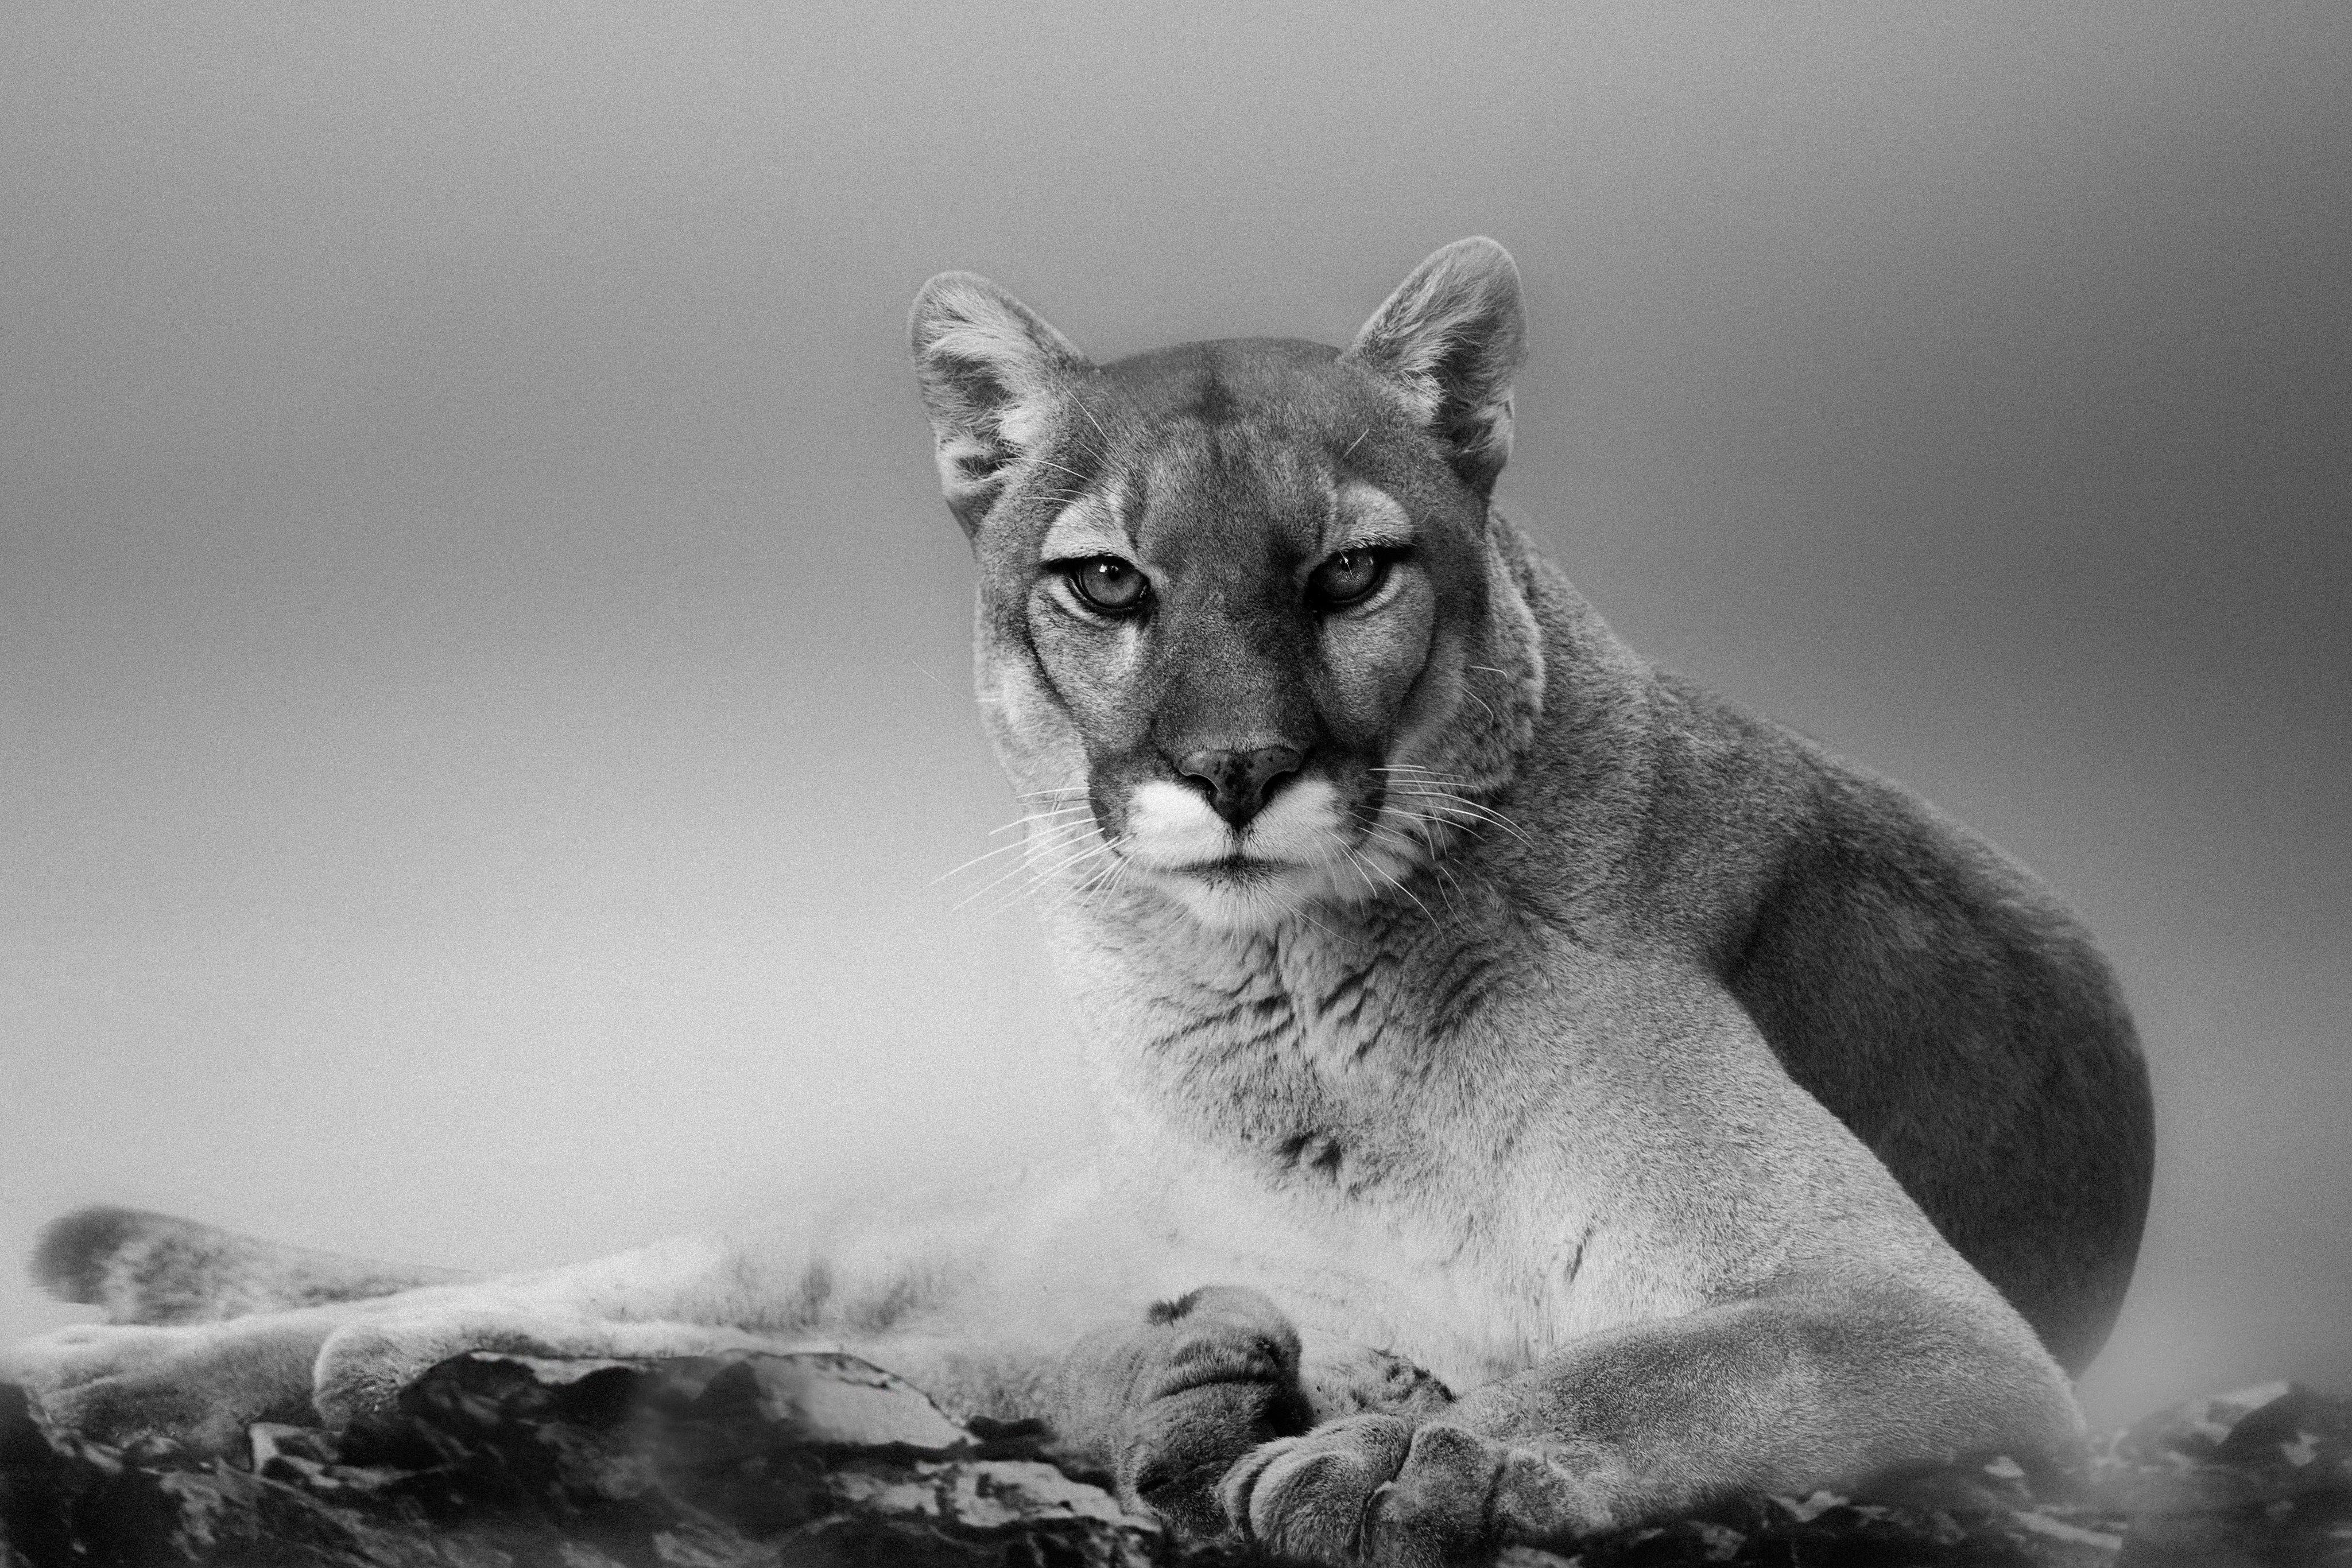 Shane Russeck Animal Print - Cougar Print 40x60 - Fine Art Photography of Mountain Lion, Cougar Unsigned 